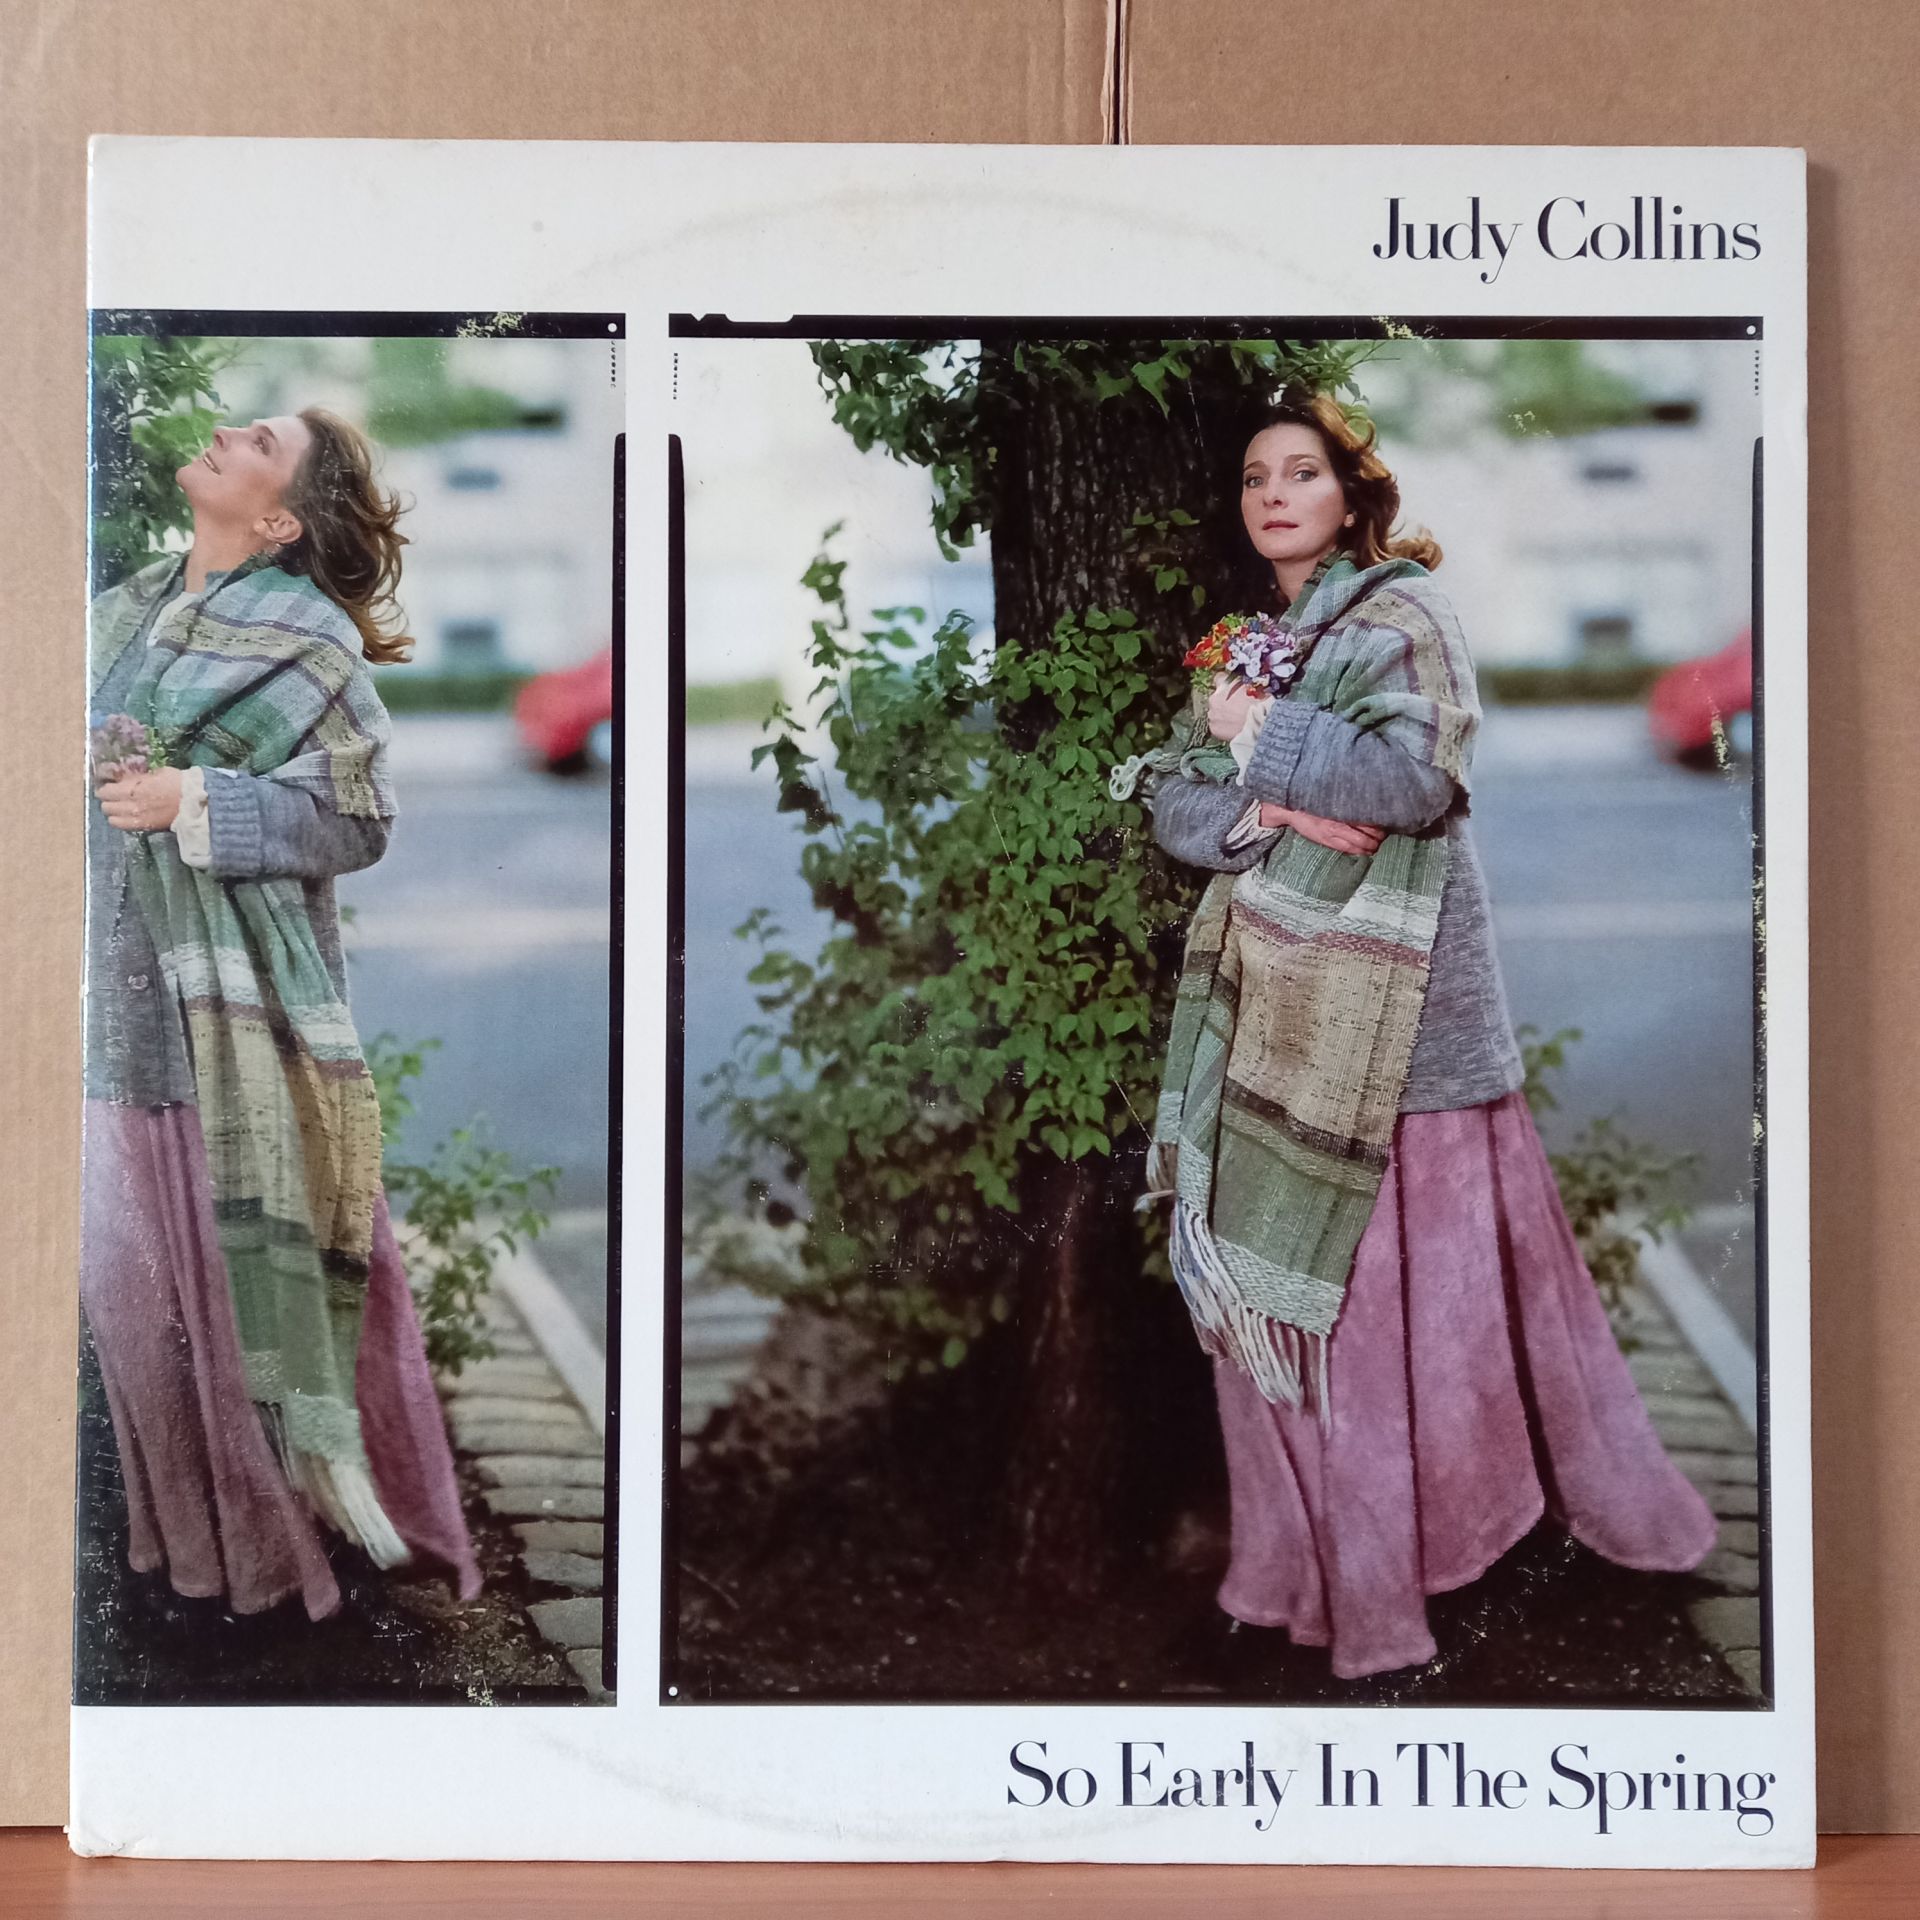 JUDY COLLINS – SO EARLY IN THE SPRING, THE FIRST 15 YEARS (1977) - 2LP 2. EL PLAK